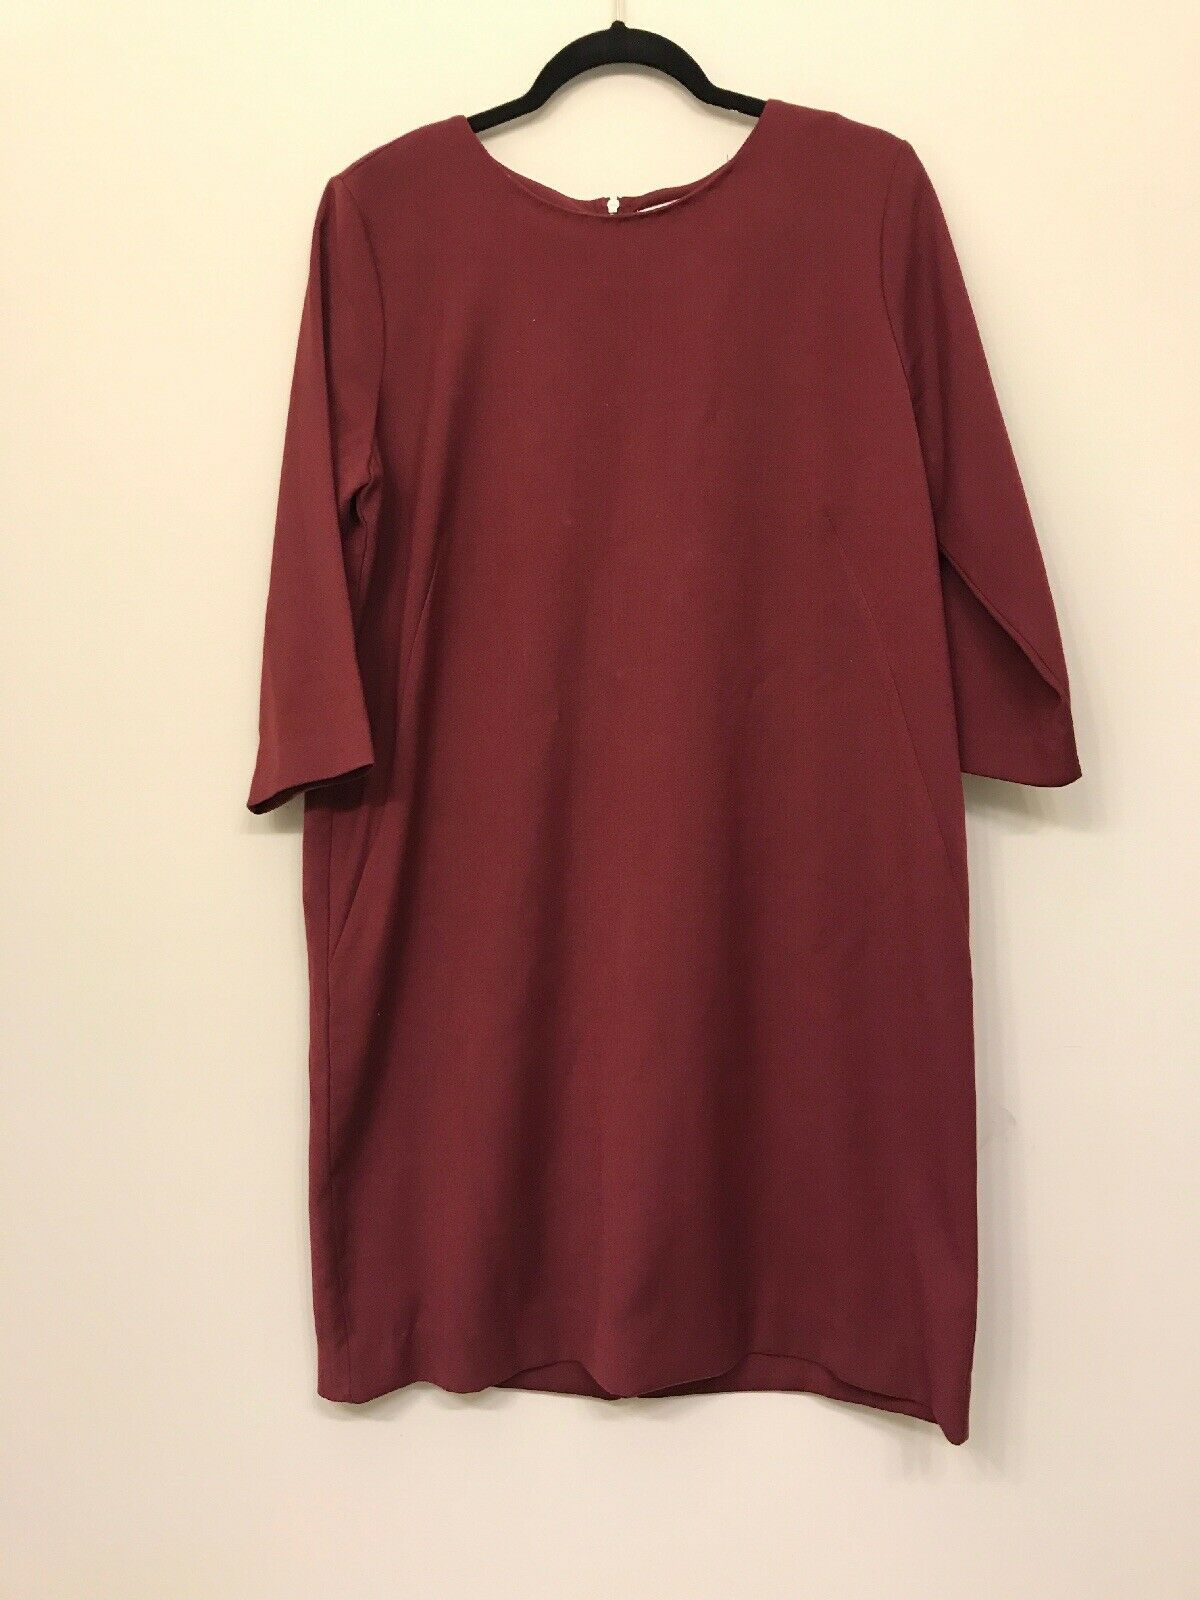 Primary image for GAP Womens 14 Shift Dress 3/4 Sleeve Maroon